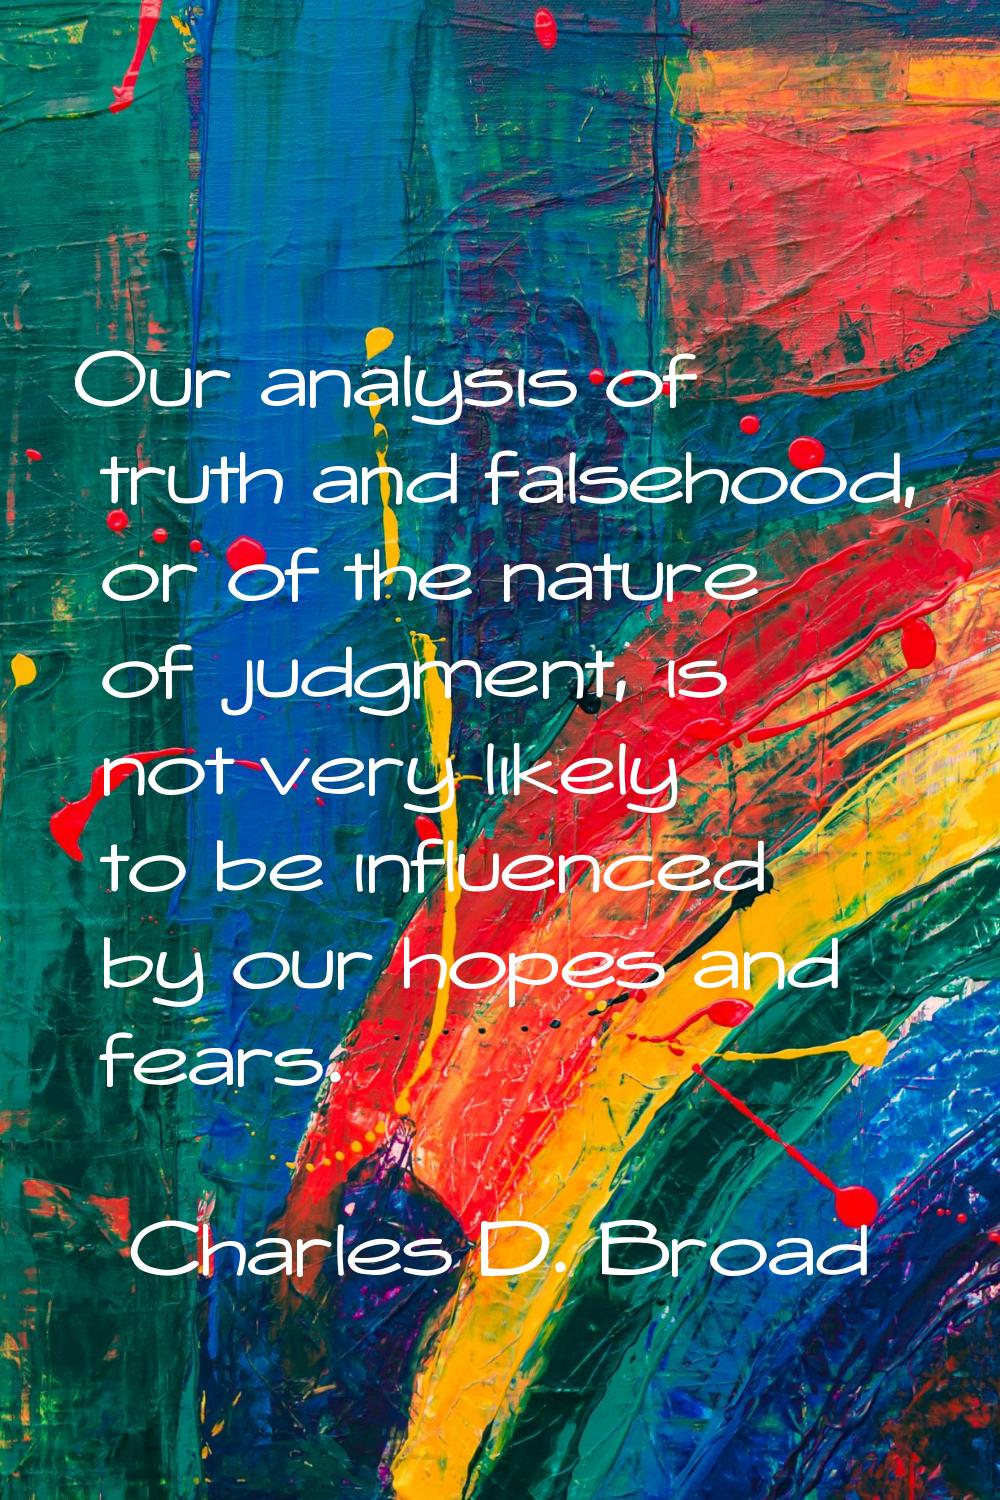 Our analysis of truth and falsehood, or of the nature of judgment, is not very likely to be influen